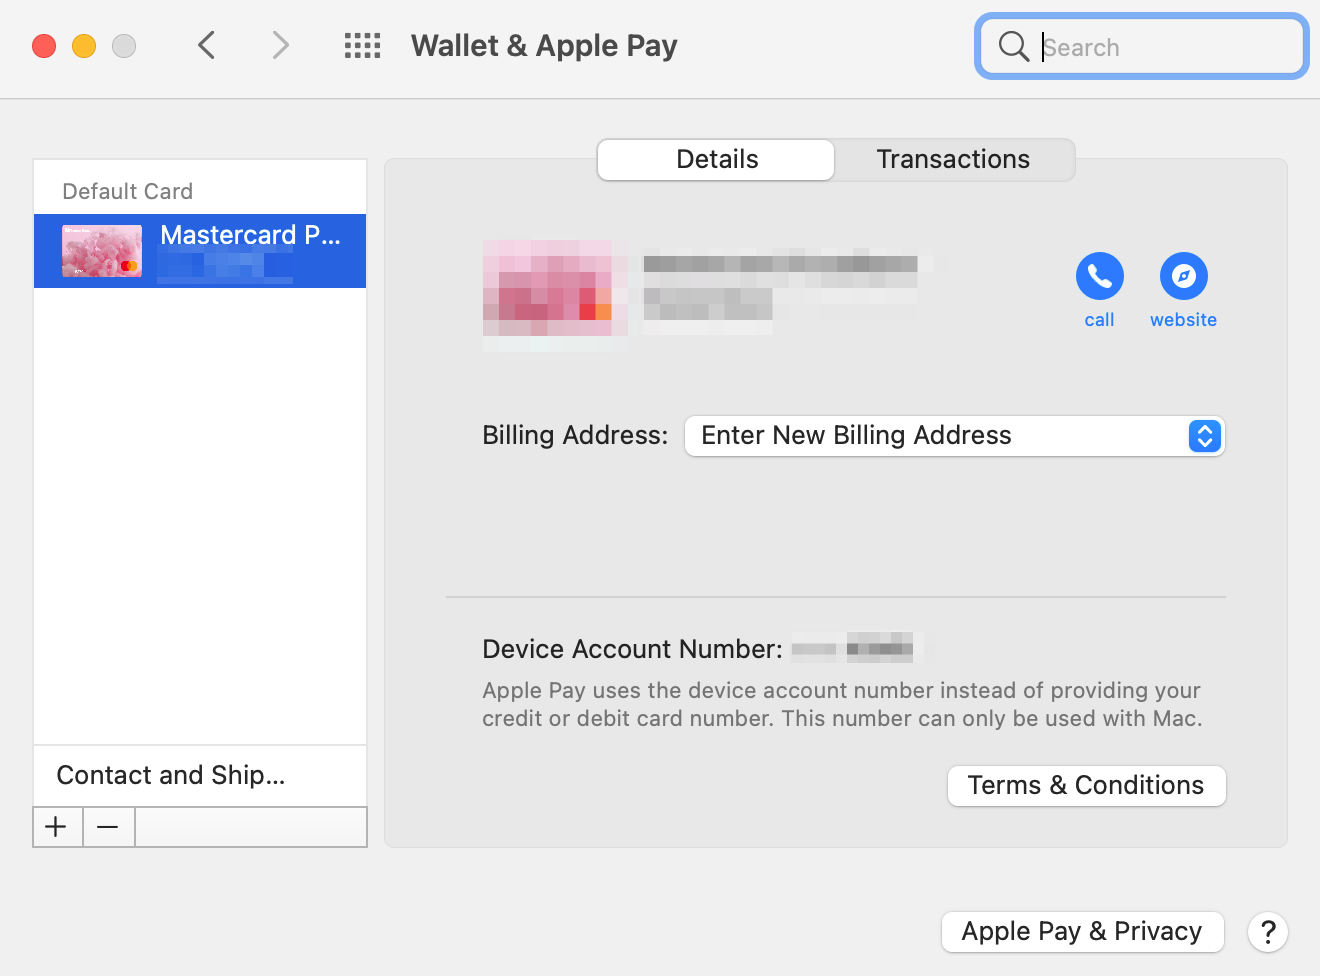 how to add and remove cards from wallet on Mac